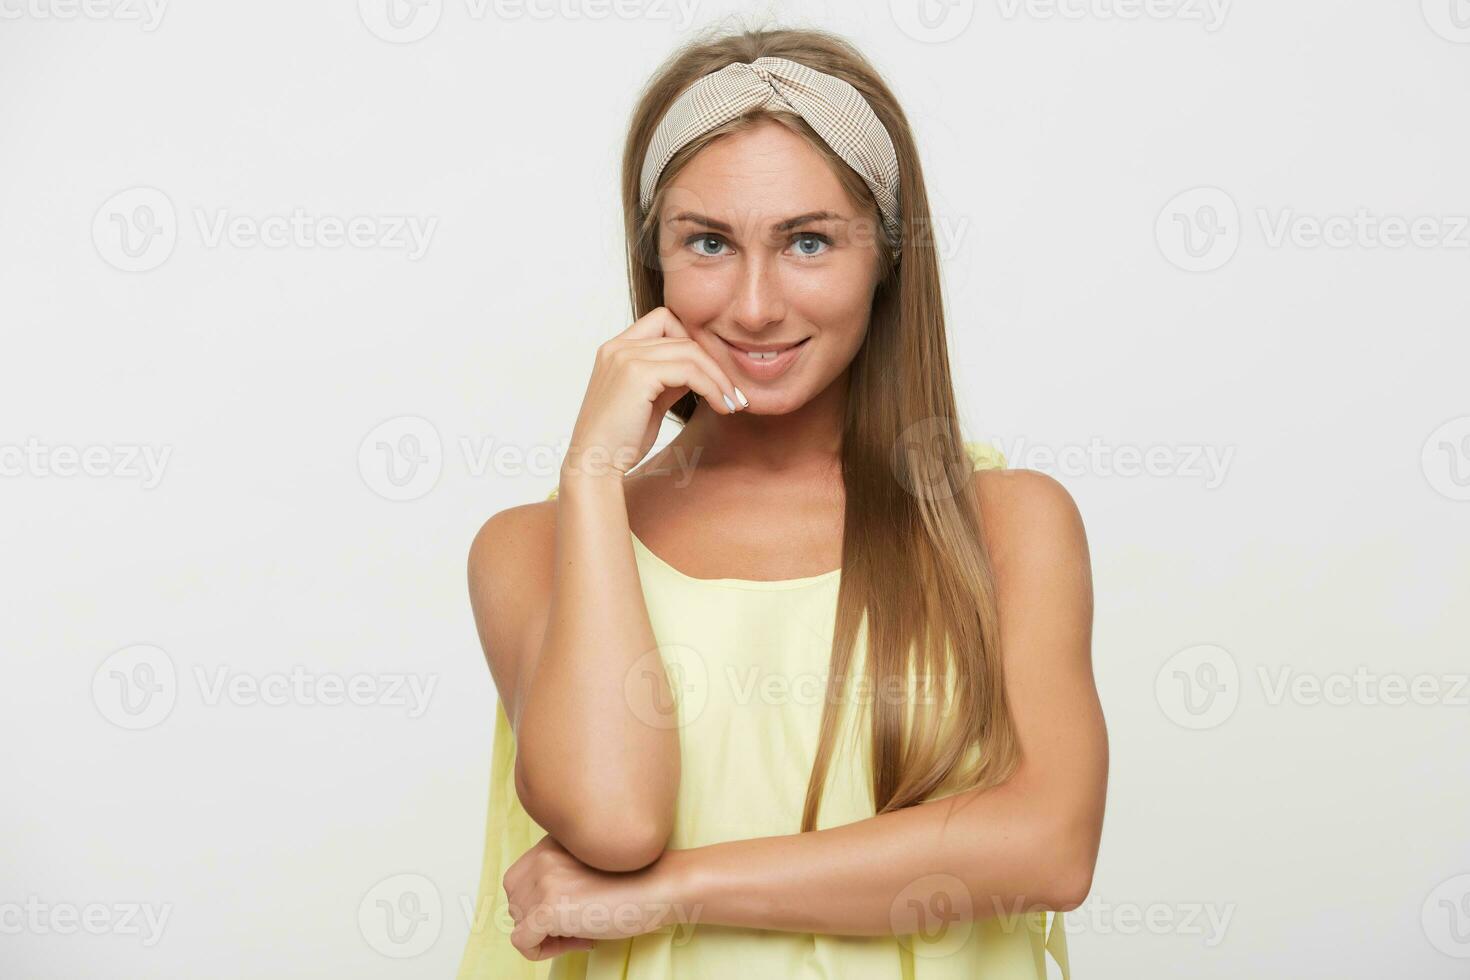 Indoor photo of beautiful positive young blonde lady with natural makeup touching gently her face with raised hand and smiling pleasantly, standing against white background